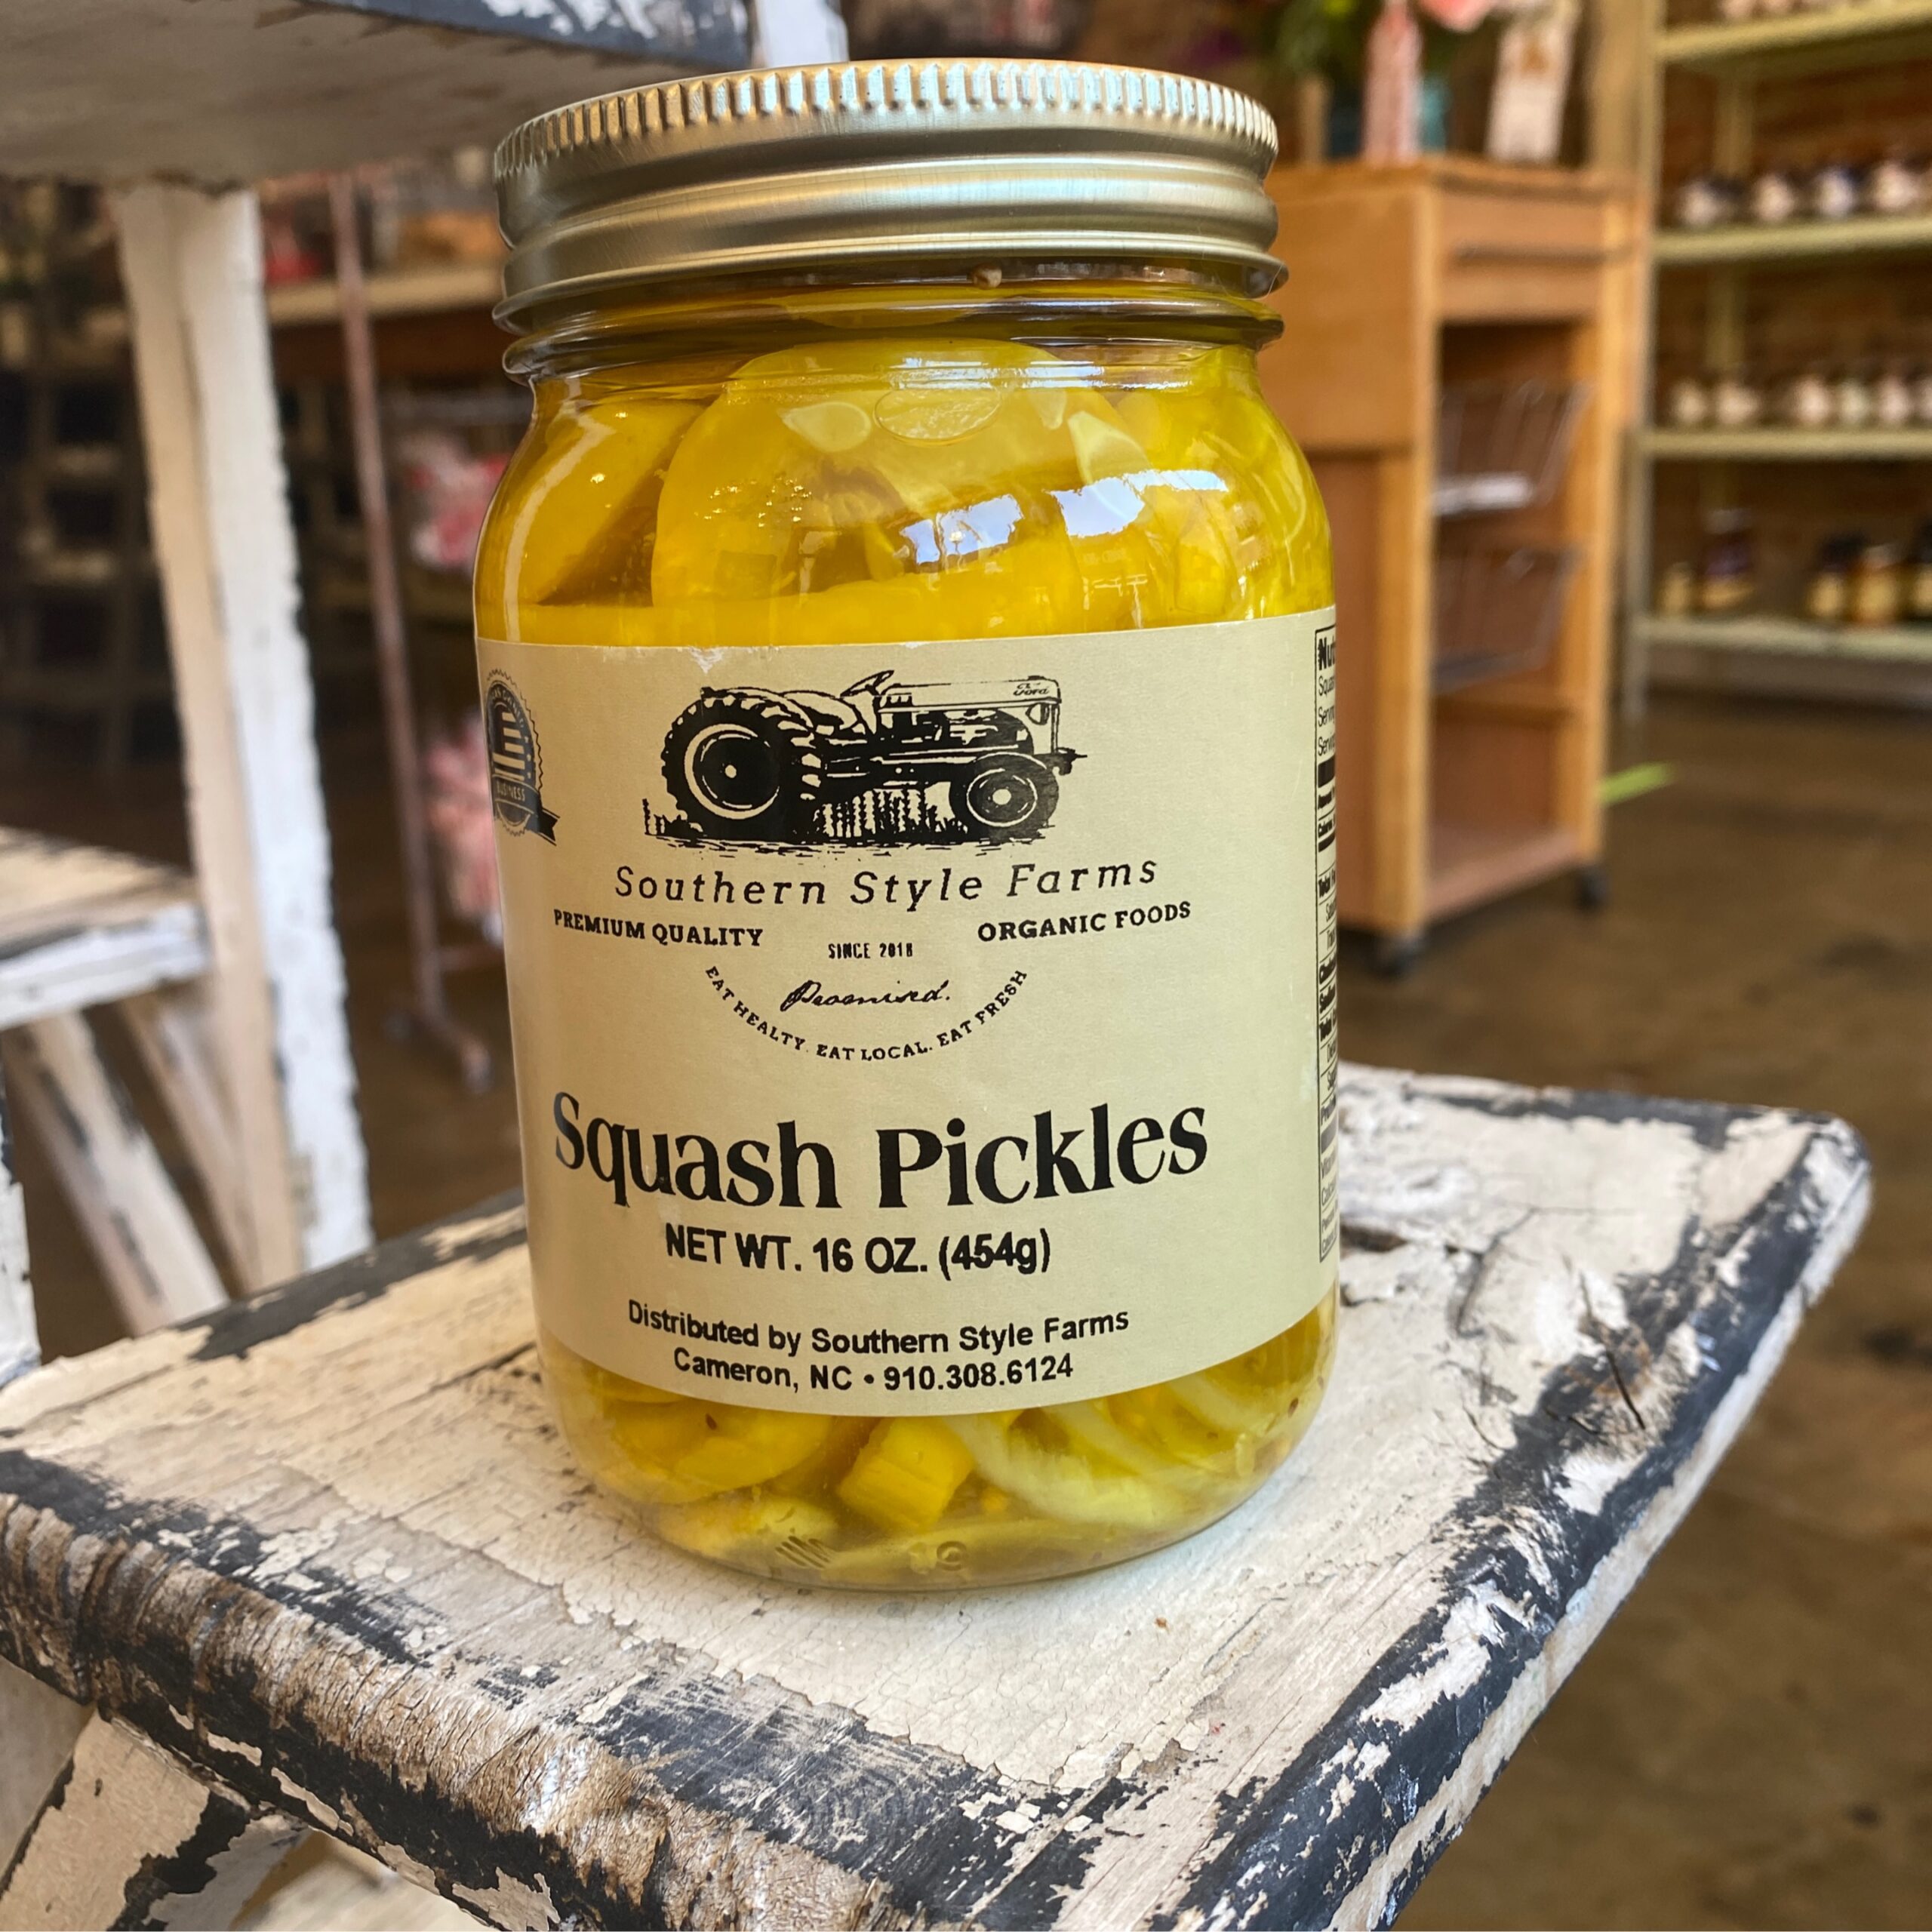 Southern Style Farms Squash Pickles